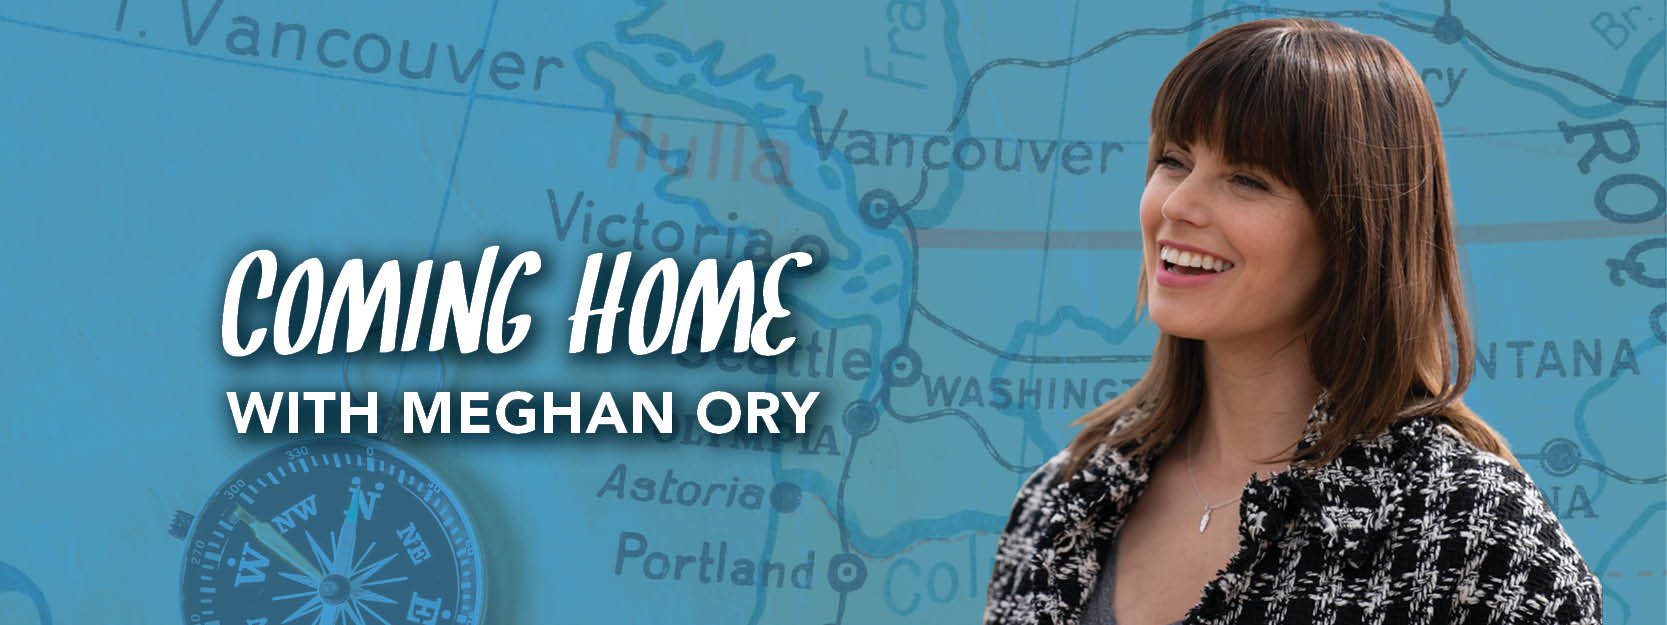 Coming Home with Meghan Ory 